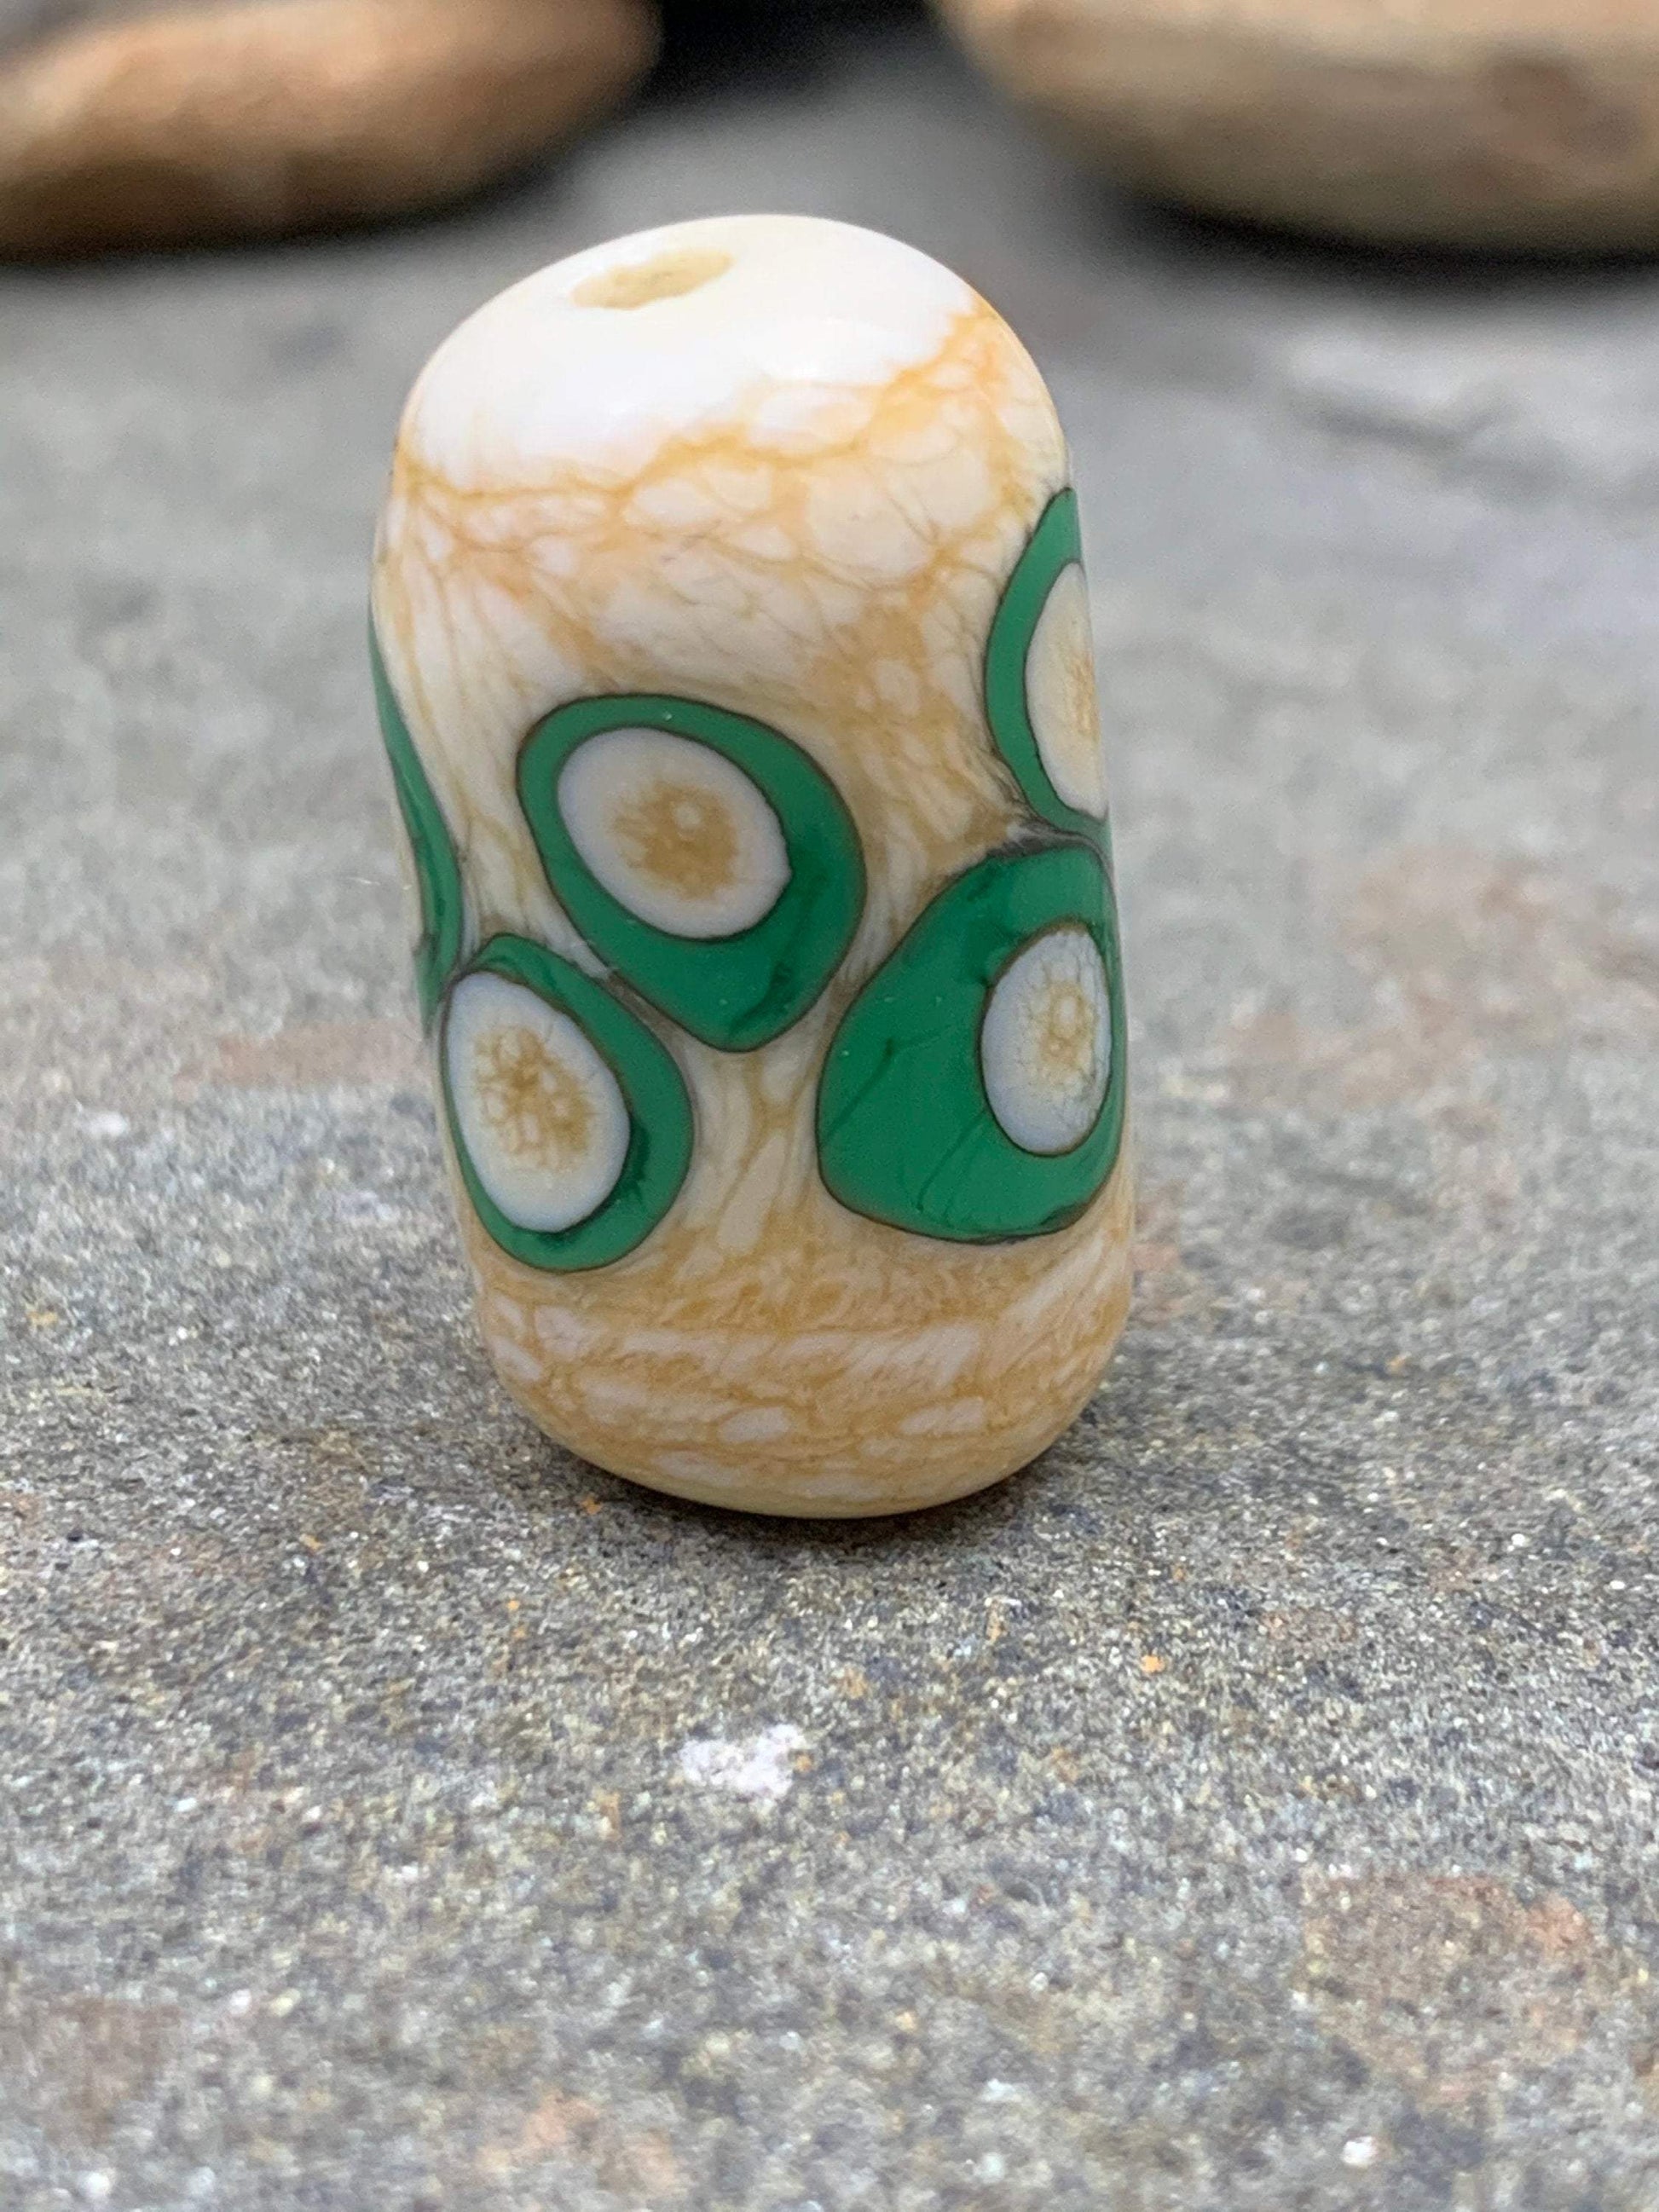 Handmade Glass Lampwork Focal Bead | Ivory Bead with Green Dots | One of a Kind Art Glass | Statement Bead for Pendant